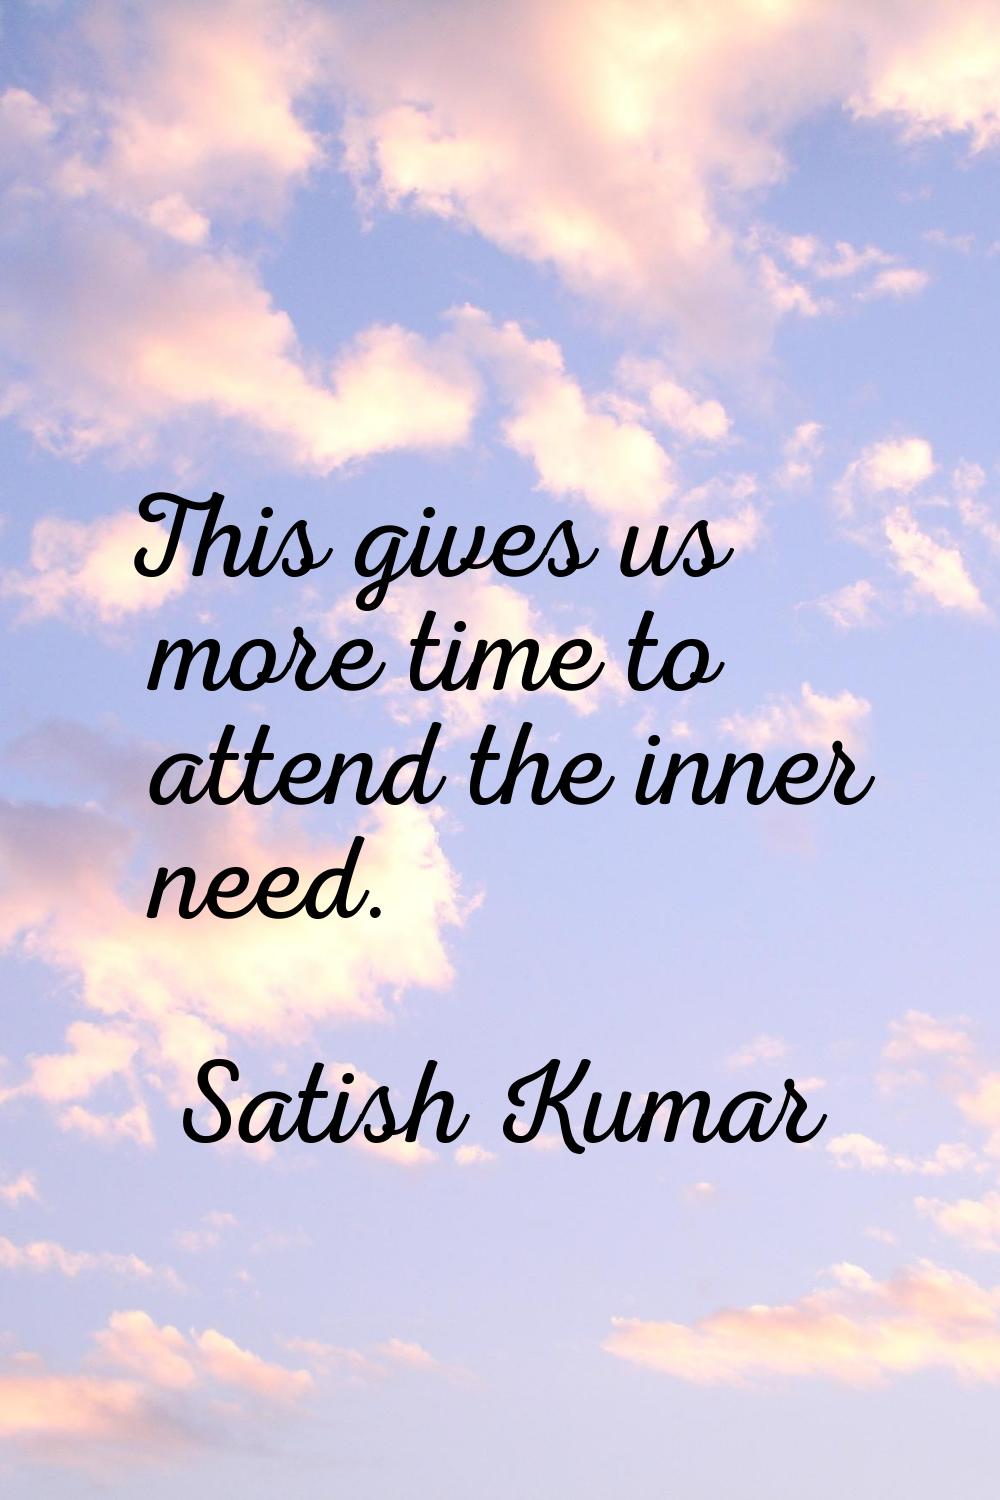 This gives us more time to attend the inner need.